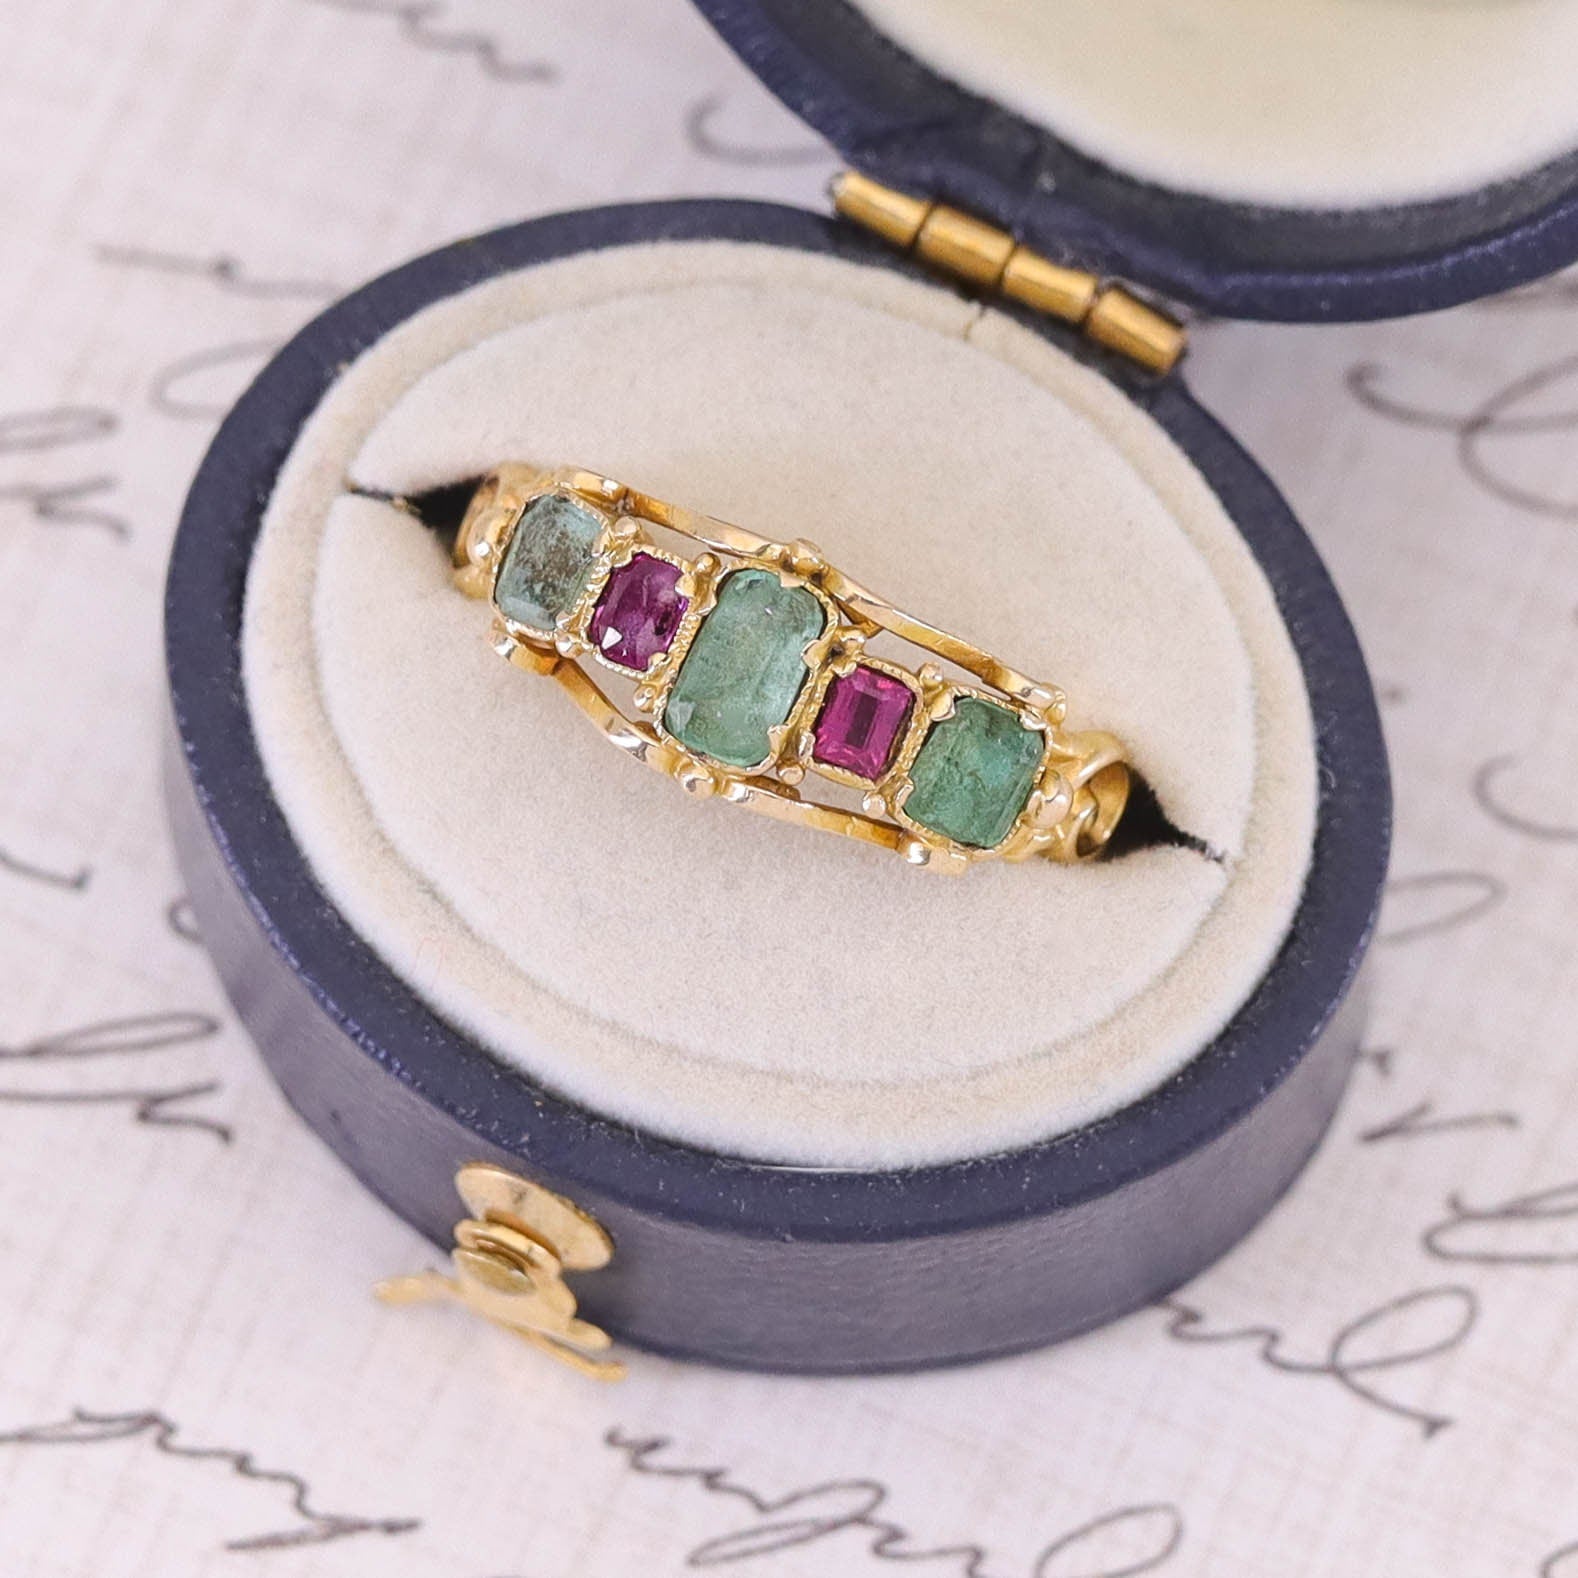 Antique Beryl and Ruby Ring of 14k Gold